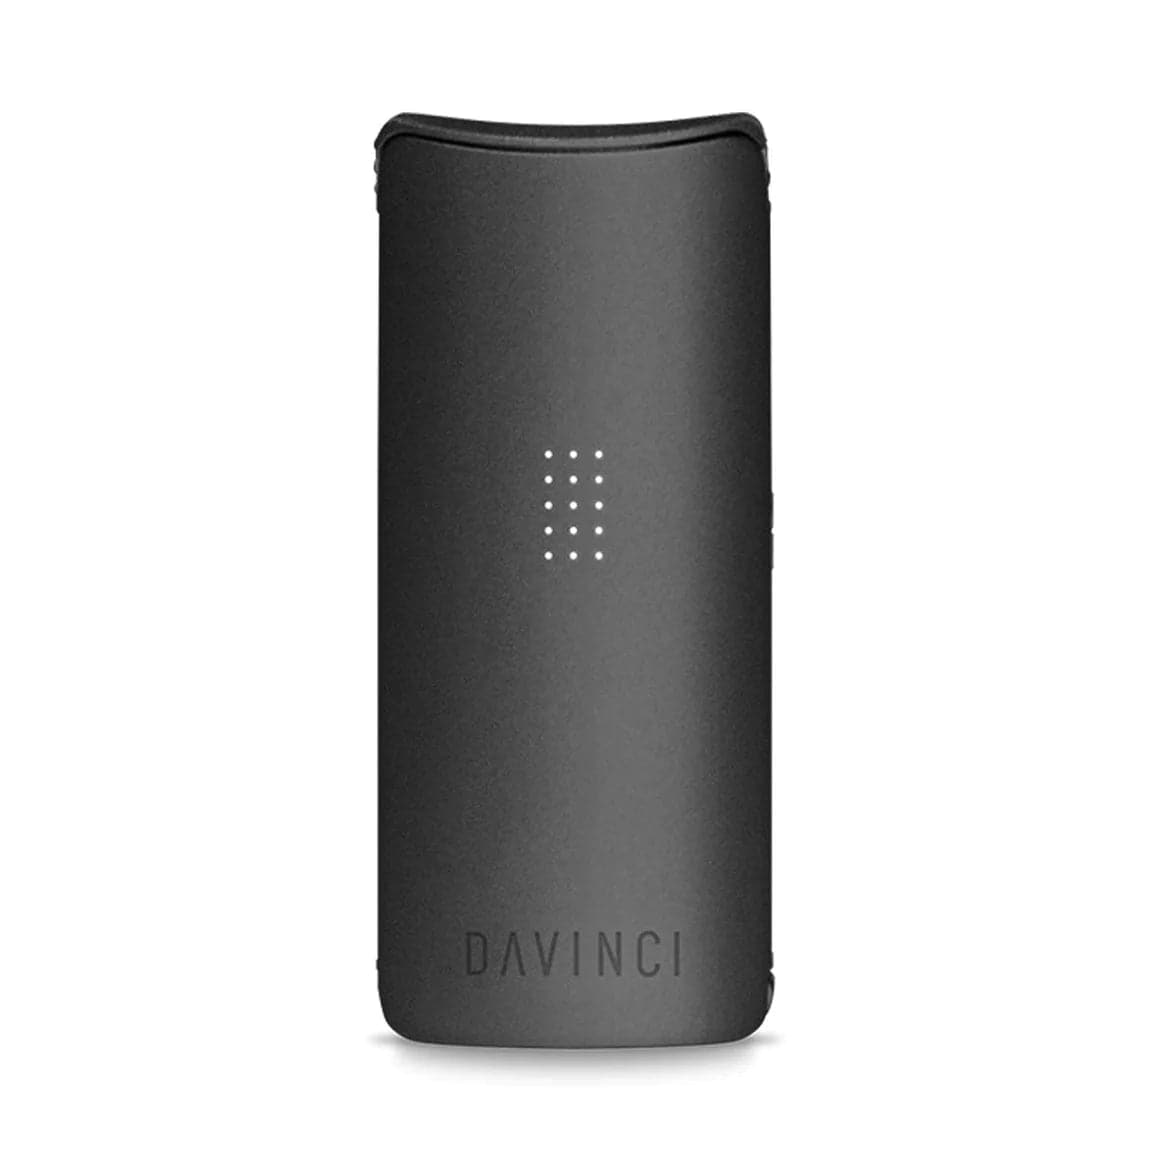 Davinci MIQRO Pocket Vaporizer - dry herbs and concentrates. Onyx